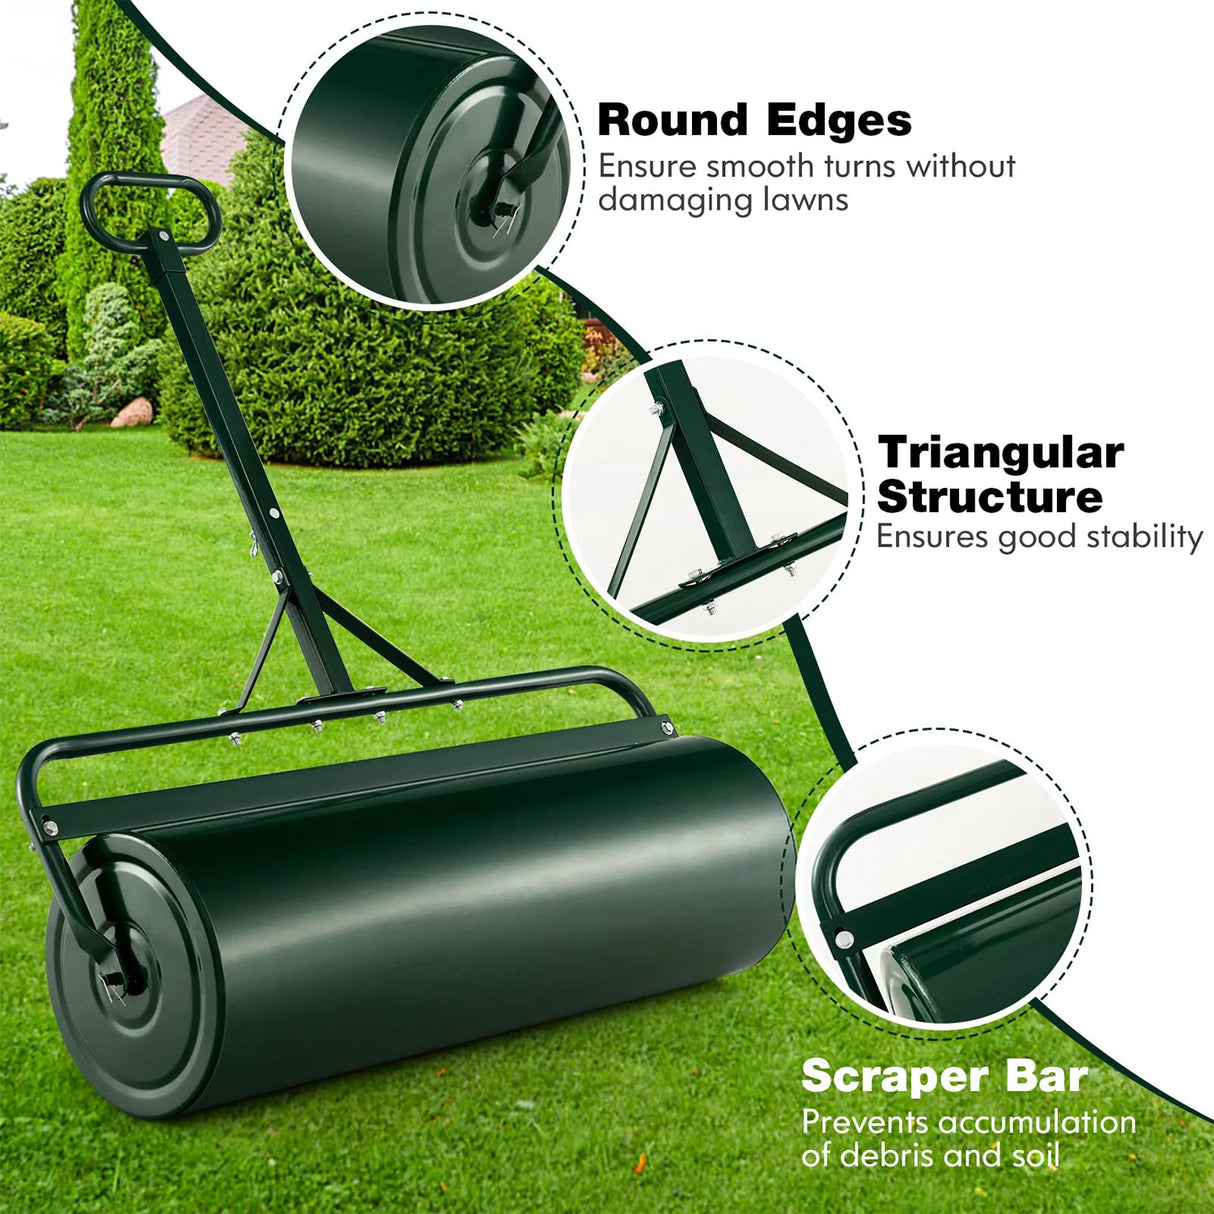 Green Lawn Roller, Push/Tow Behind Lawn Roller, 30 Gallon/113L Water Sand Filled Sod Roller Drum Roller with Detachable Gripping Handle, Yard Roller Pull Behind a Tractor for Garden Yard Park Farm